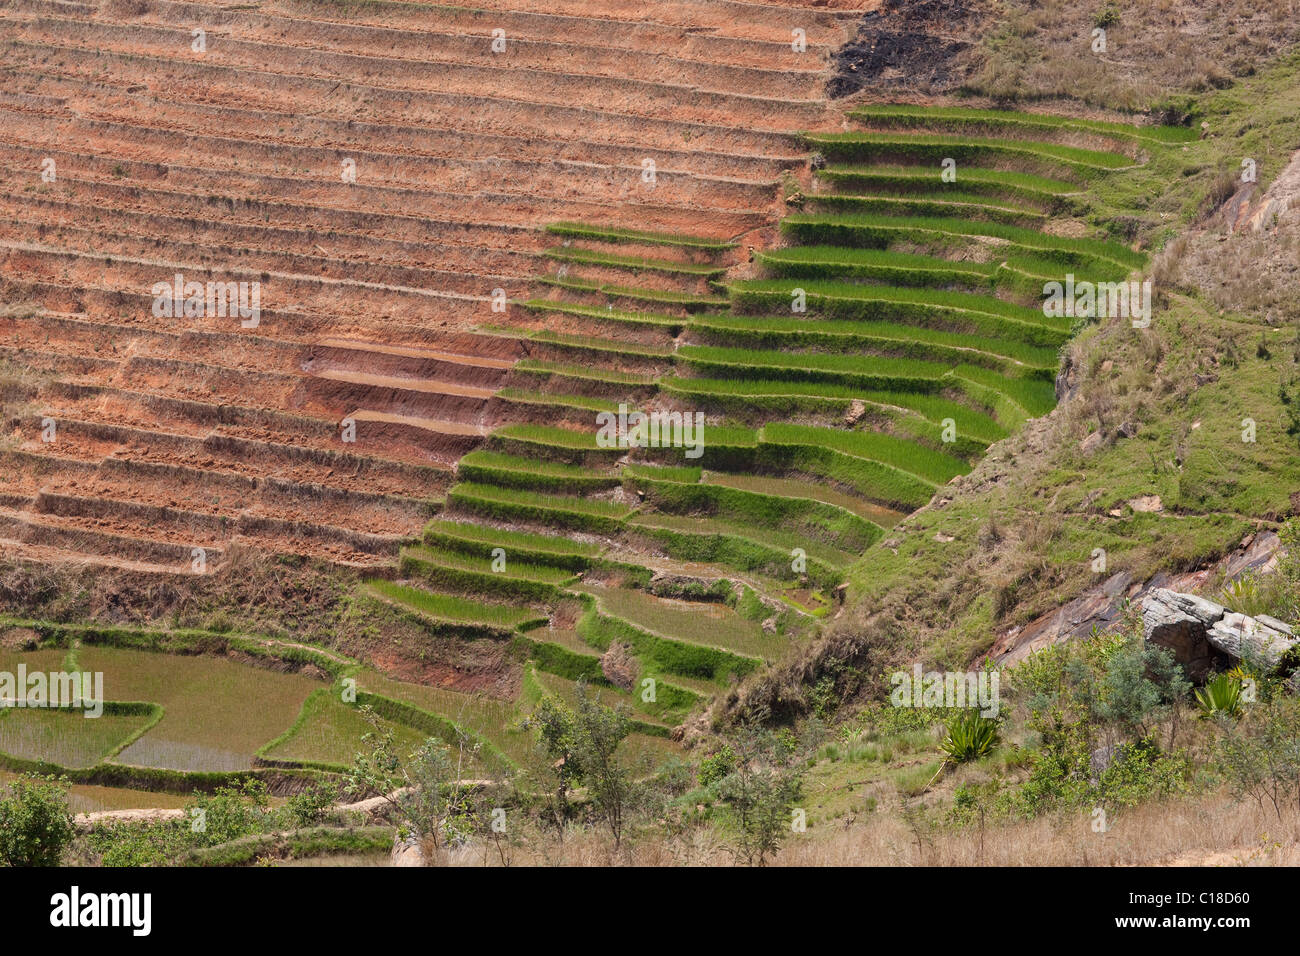 River valley managed for Rice (Oryza   sativa), crop cultivation. Southern Madagascar. Stock Photo